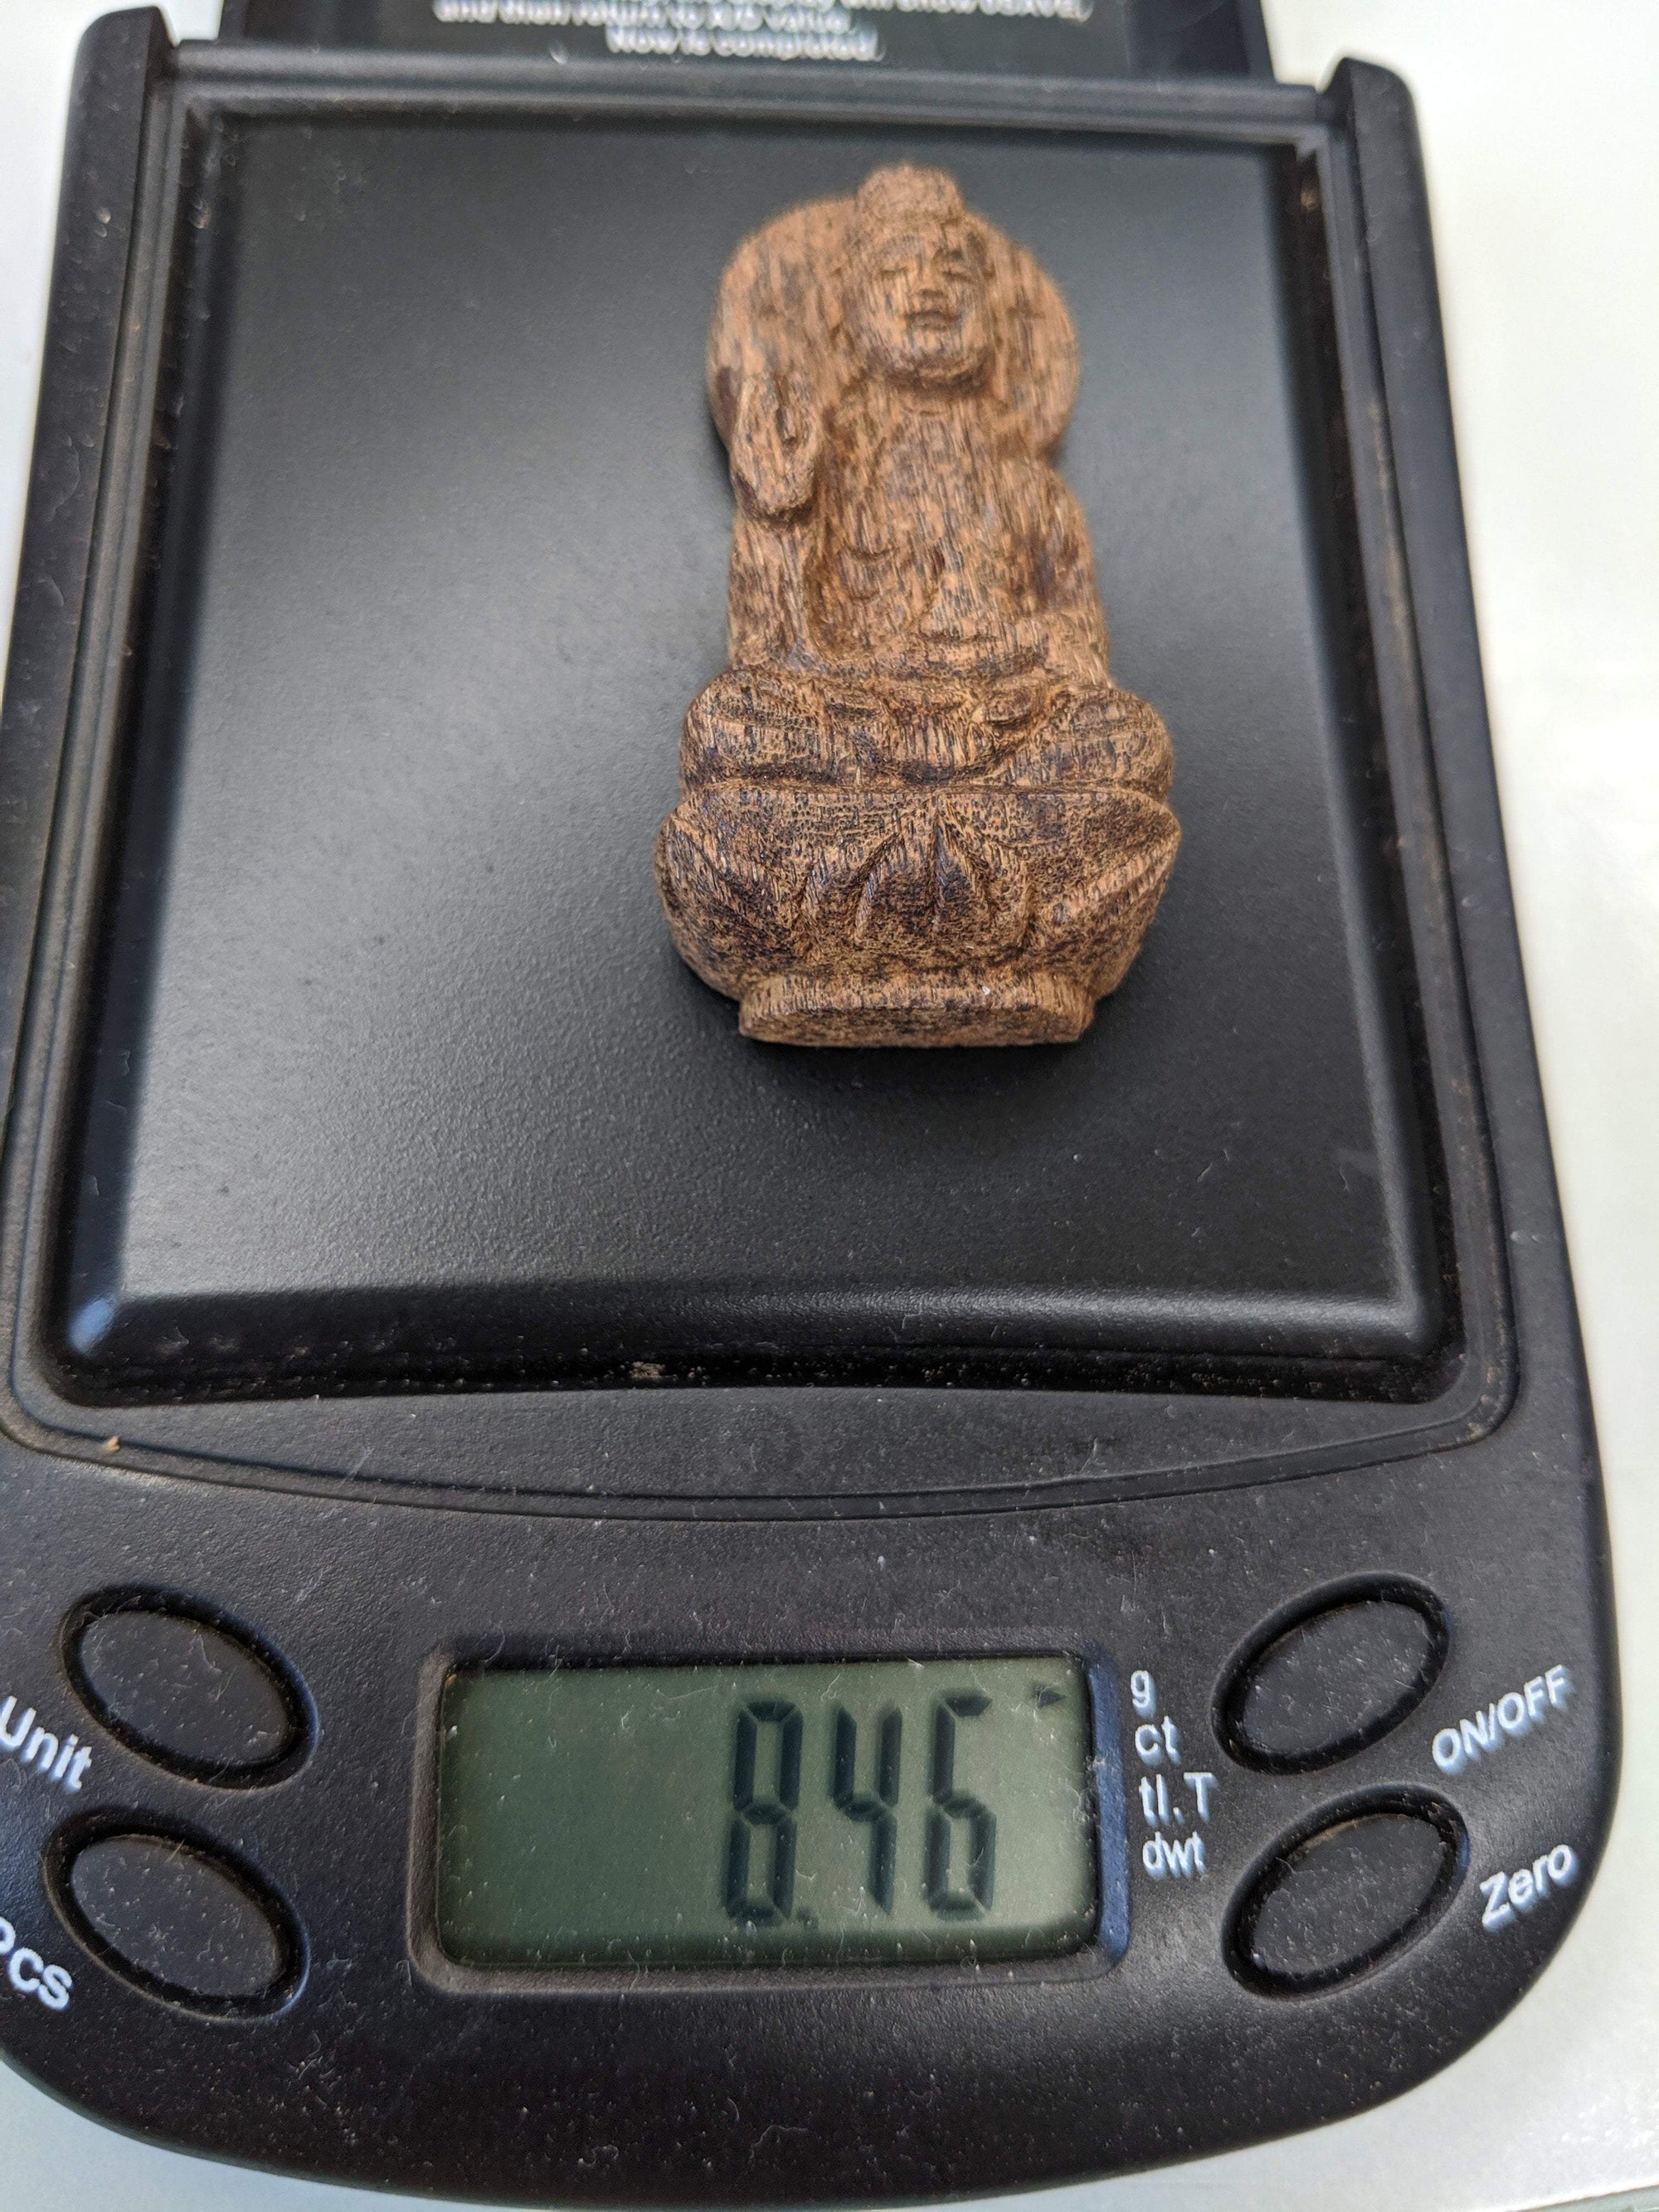 Guan Yin Pedant -Specially Crafted with high quality cultivated agarwood -